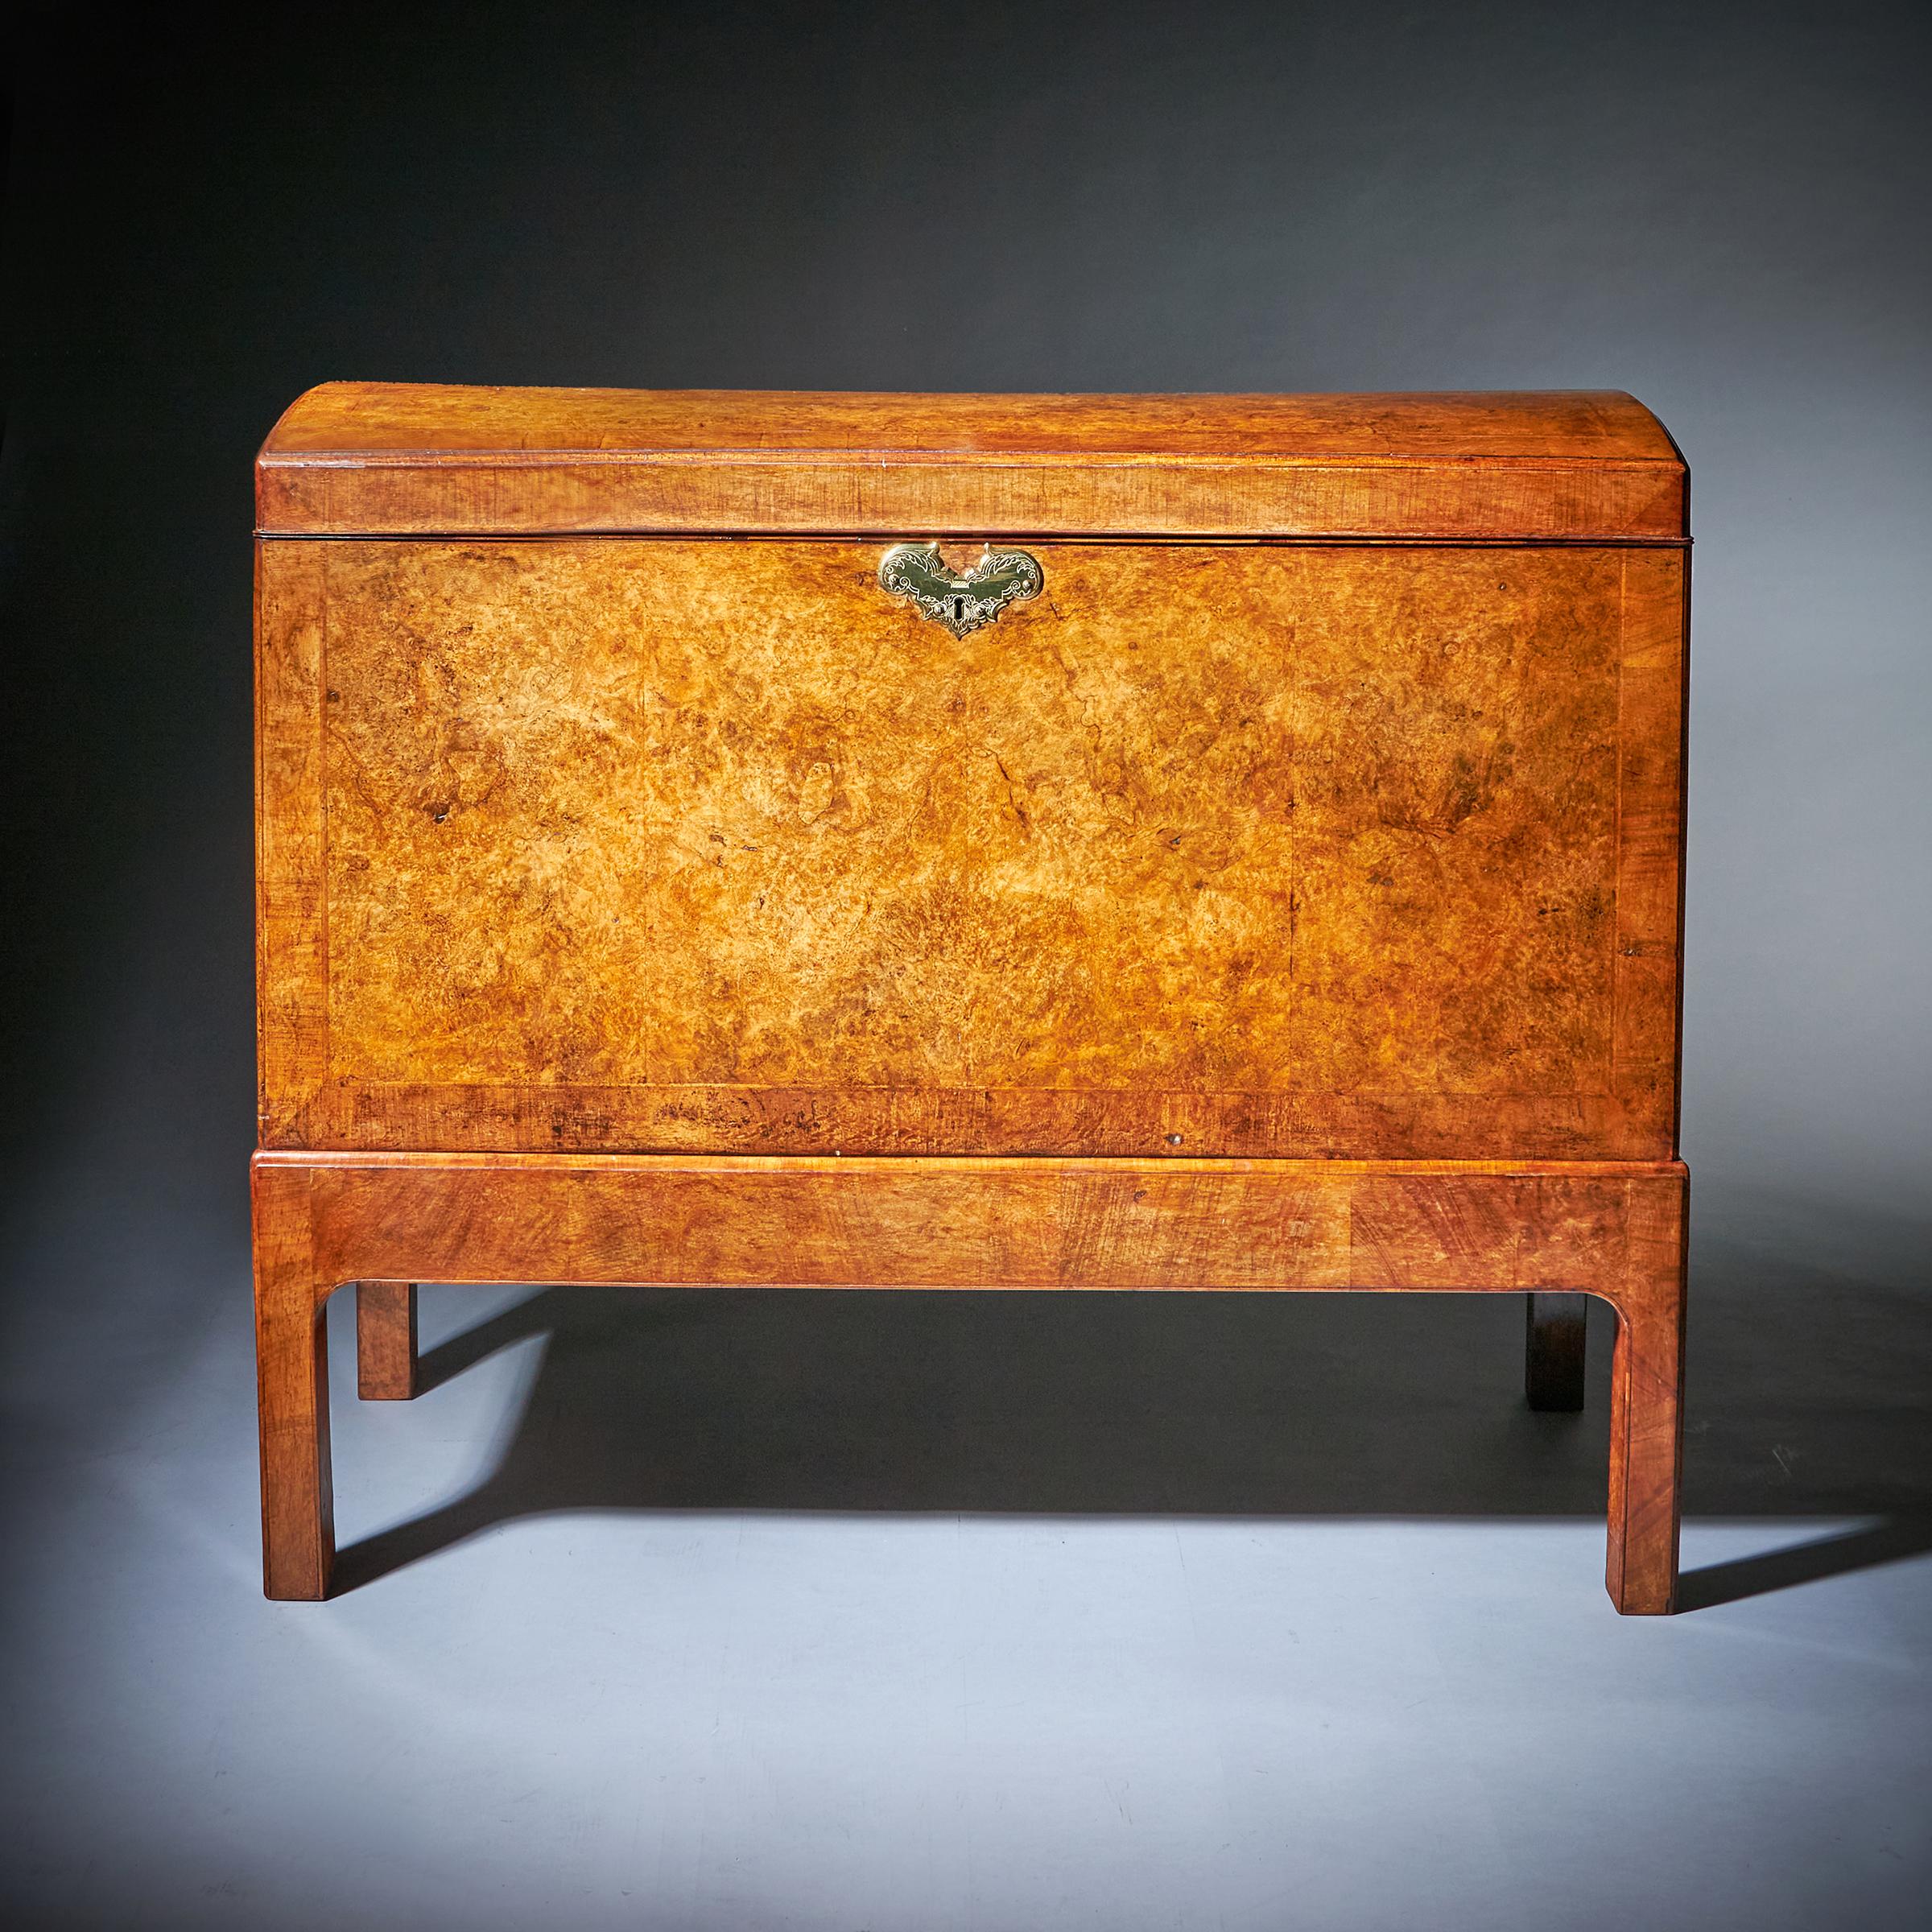 The Countess Mountbatten of Burma early 18th century George I Burr Walnut Chamber Chest. C.1710-1730. England

The cross and feather-banded burr walnut domed top chest opens to reveal 18th-century handpainted Chinese export wallpaper.